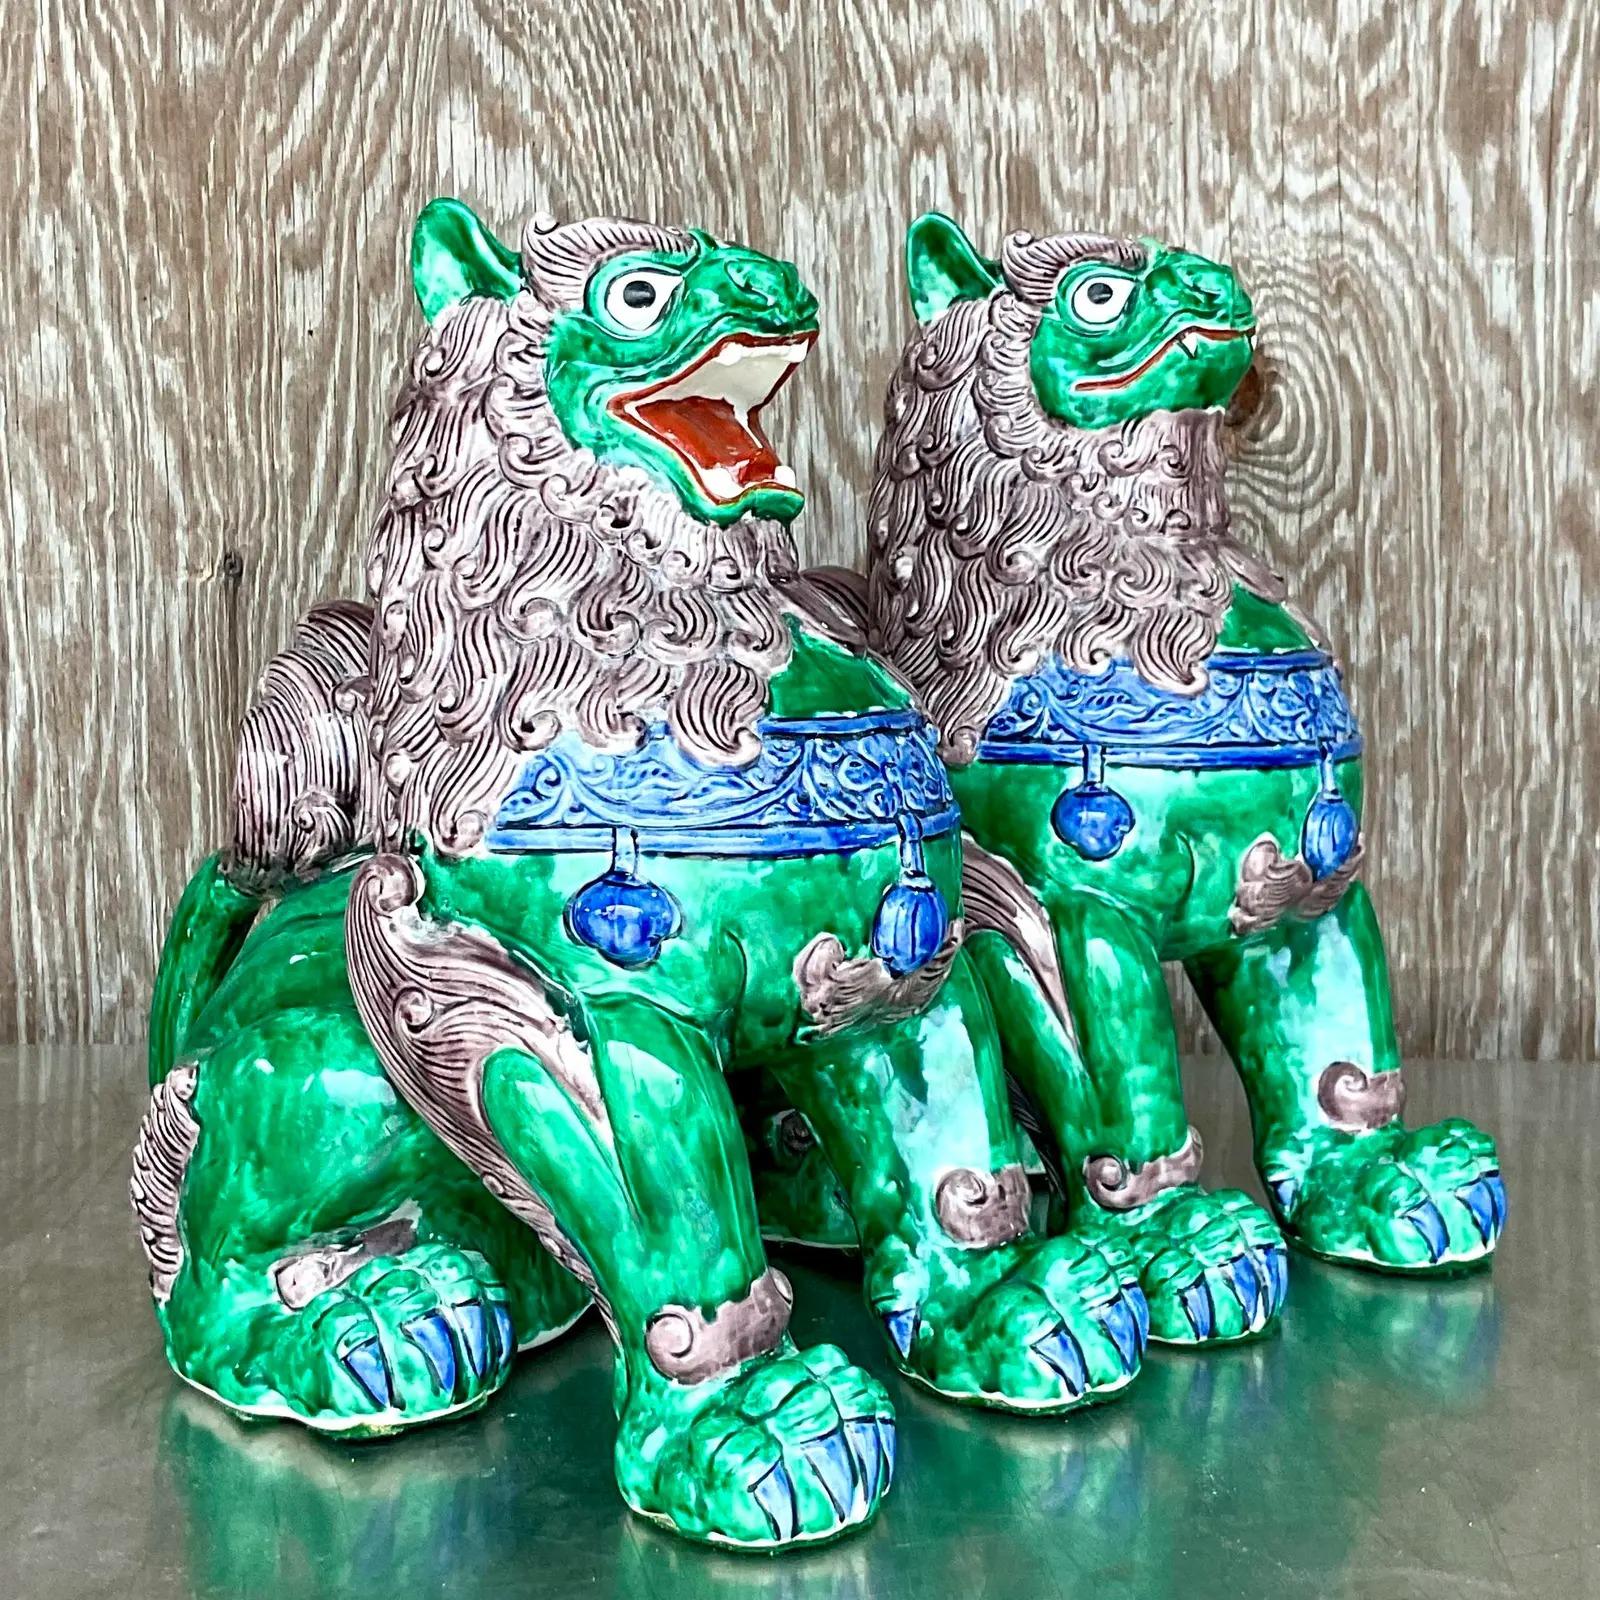 Japanese Vintage Asian Glazed Ceramic Foo Dogs - a Pair For Sale